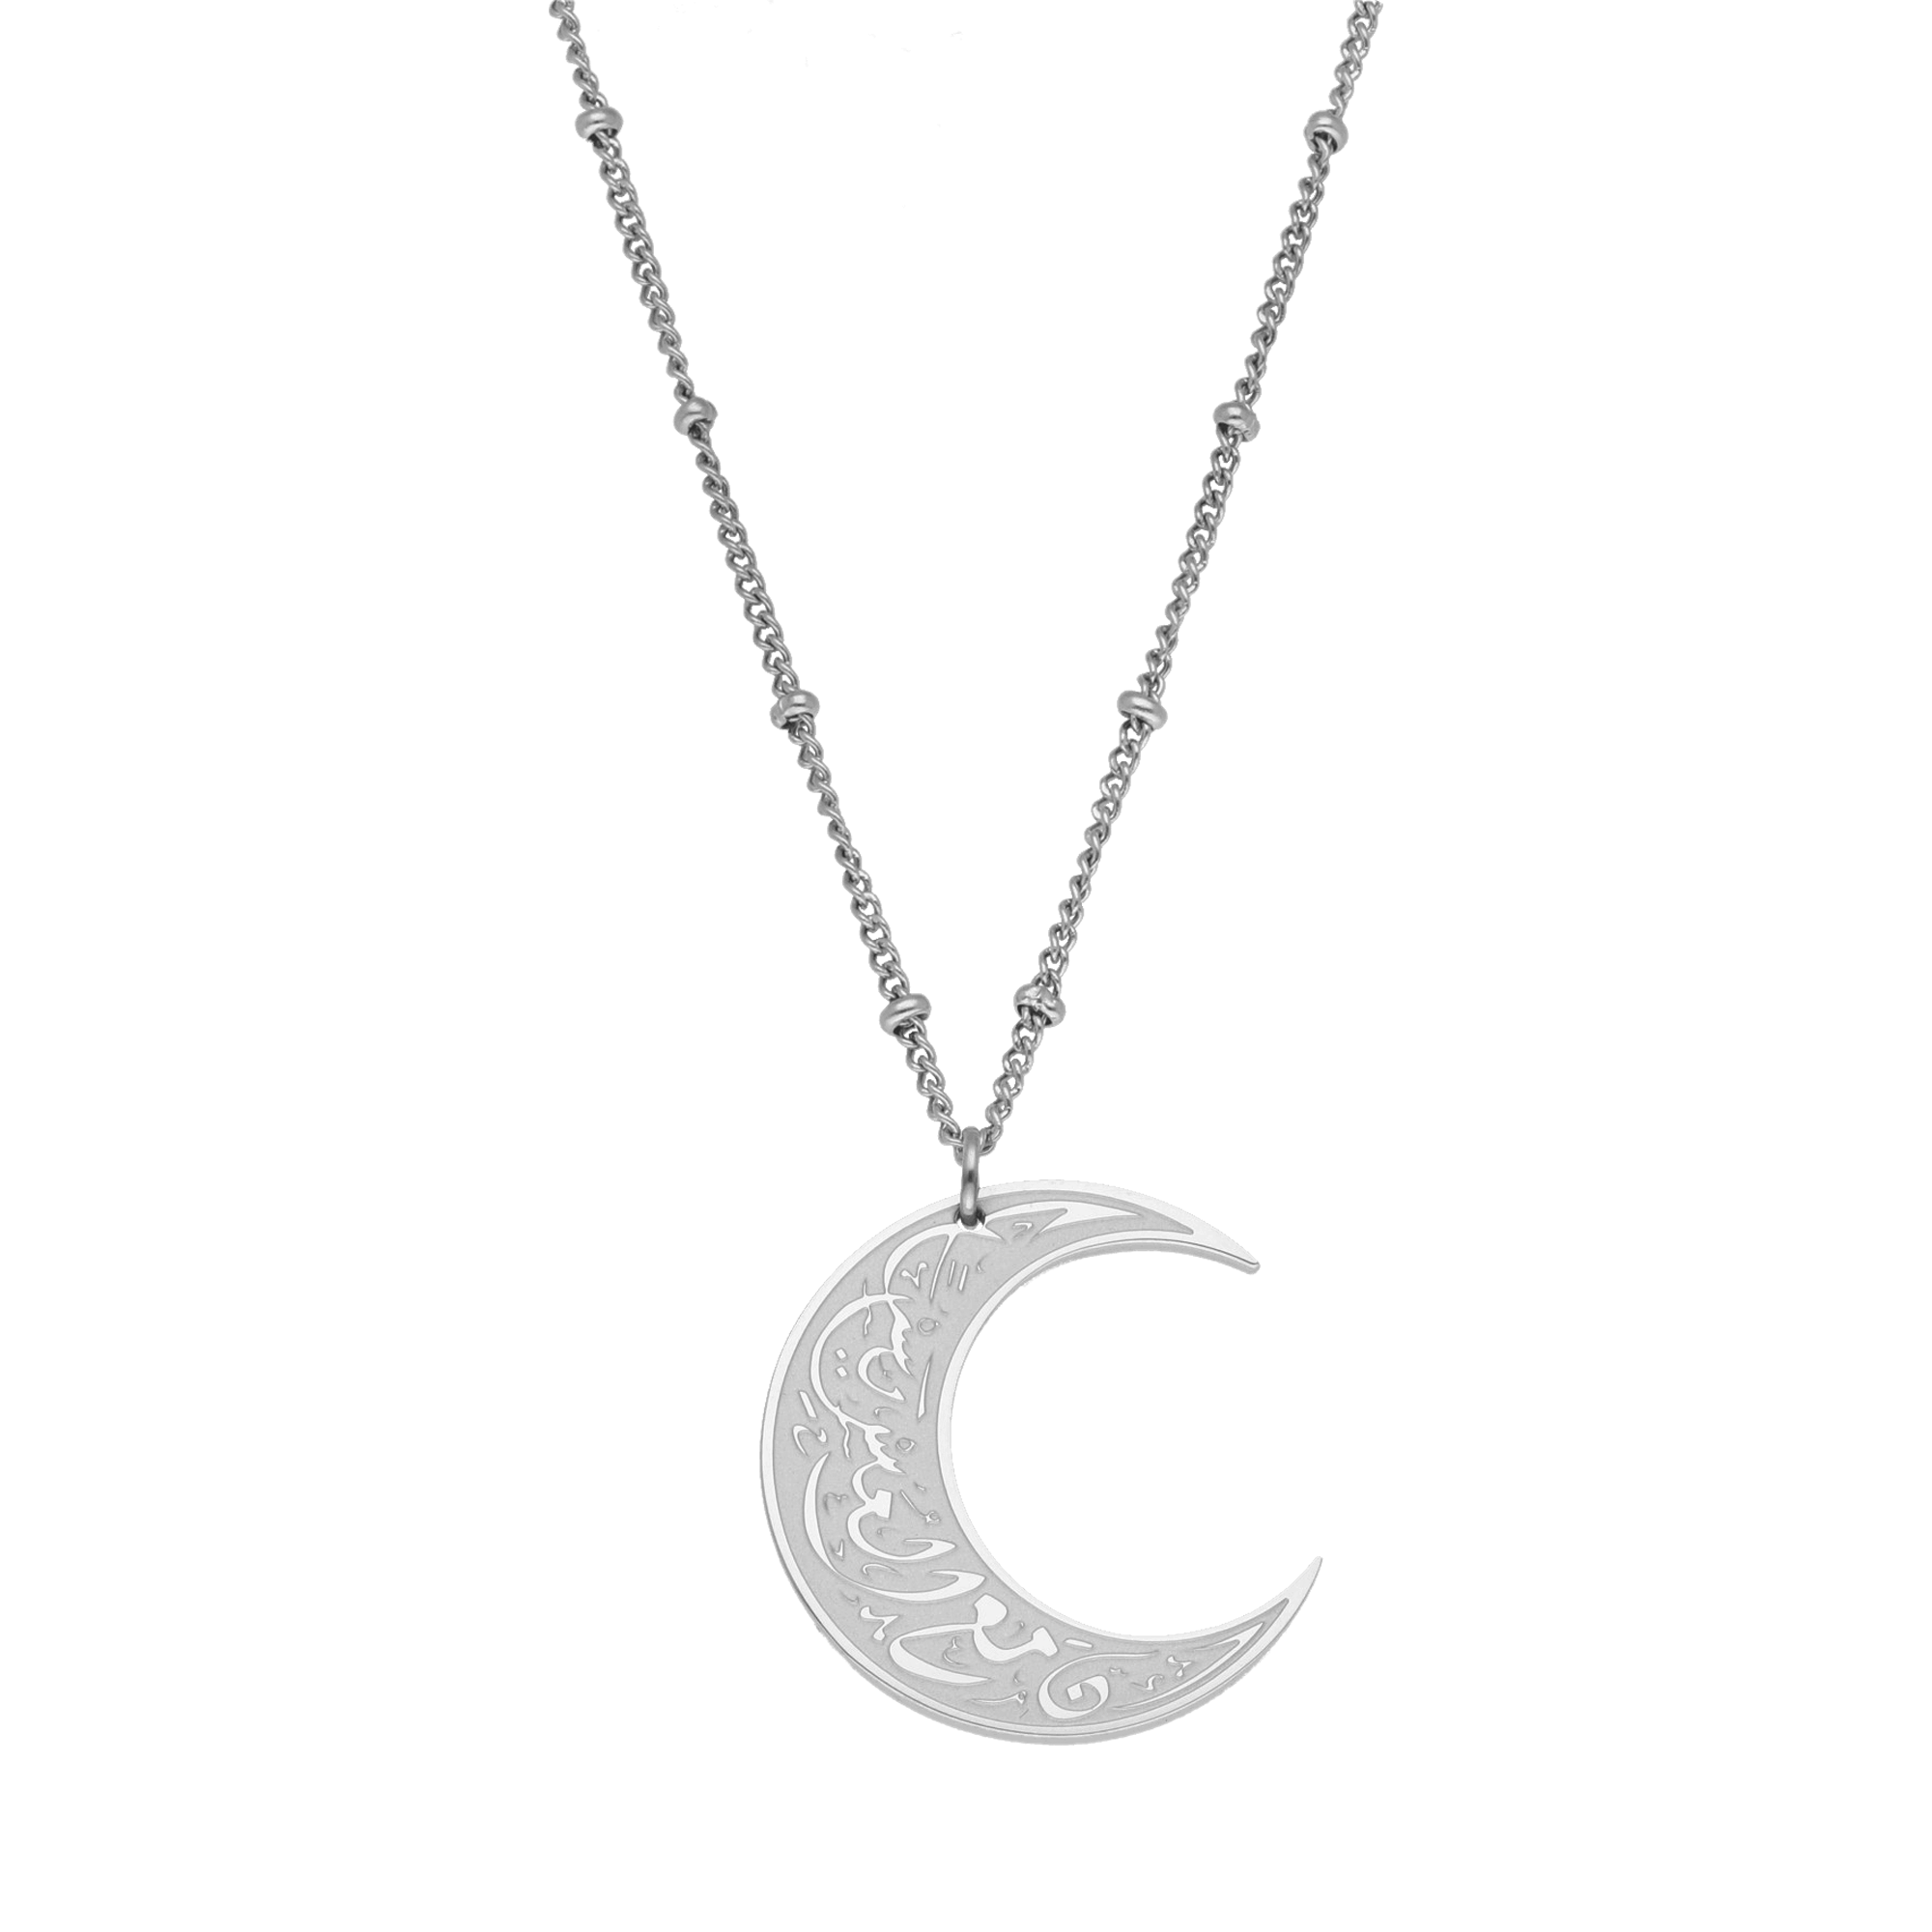 "Verily, with hardship, comes ease" Moon Necklace